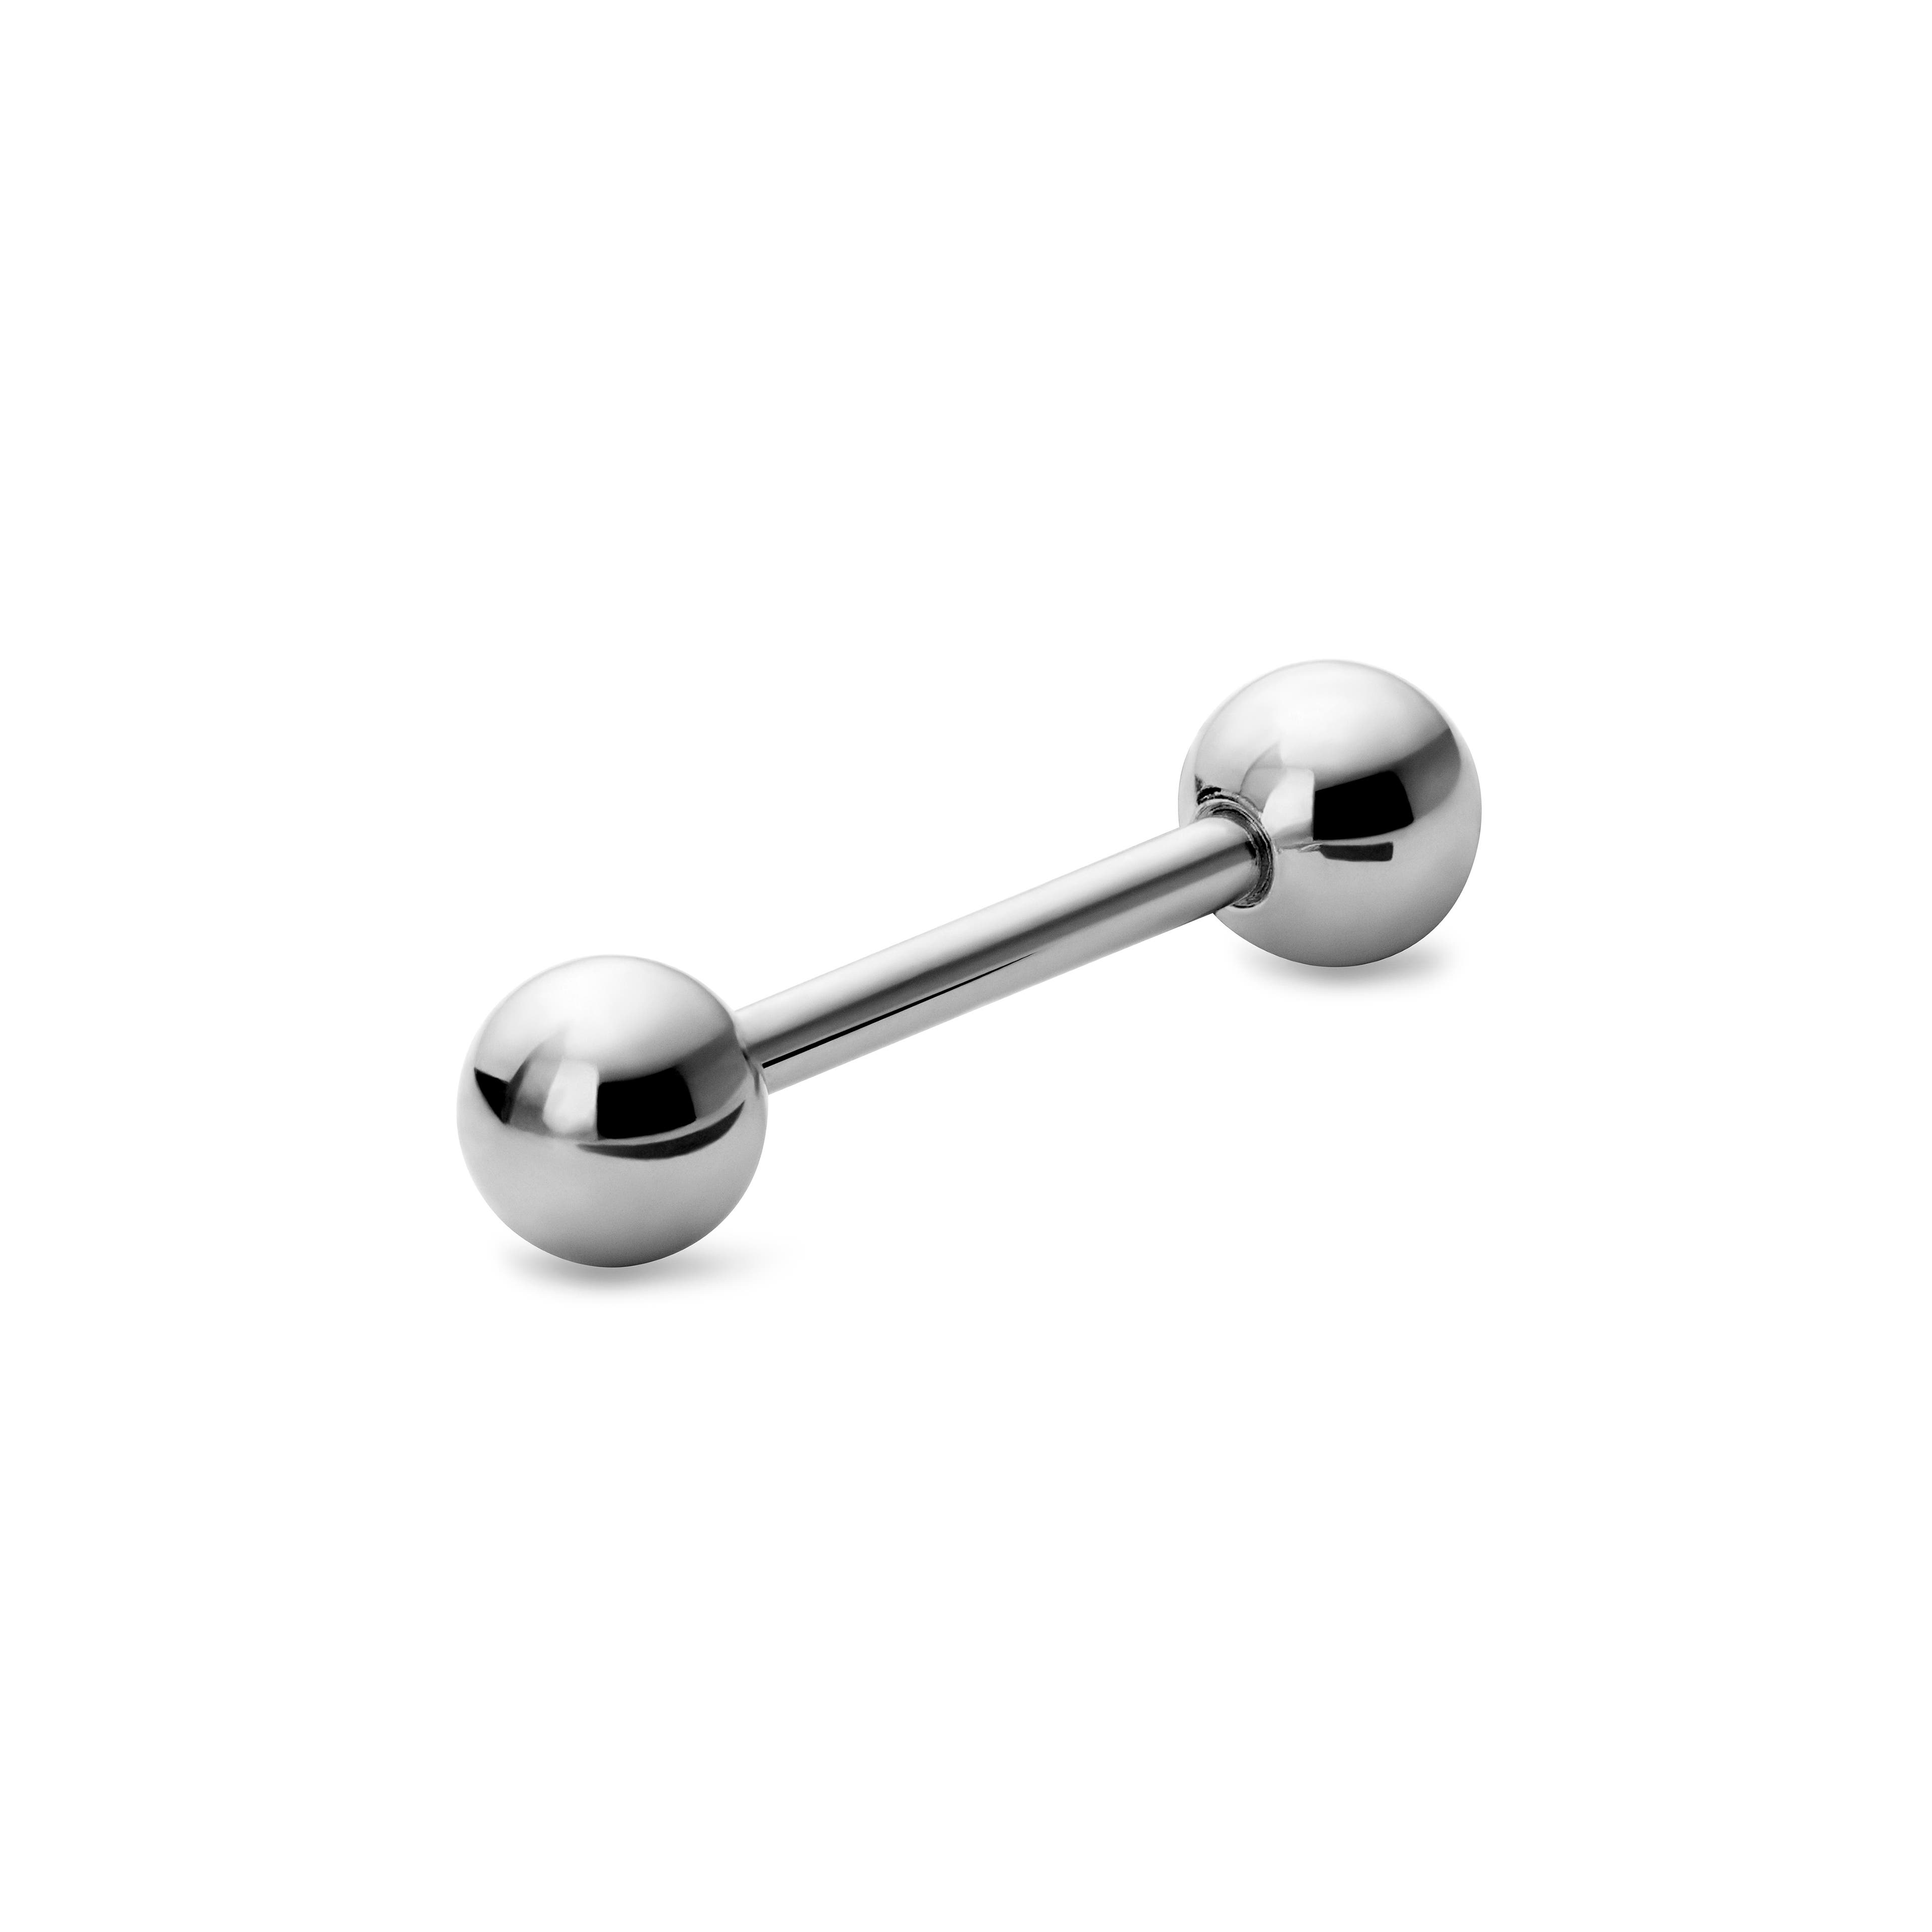 6 mm Silver-Tone Straight Ball-Tipped Surgical Steel Barbell